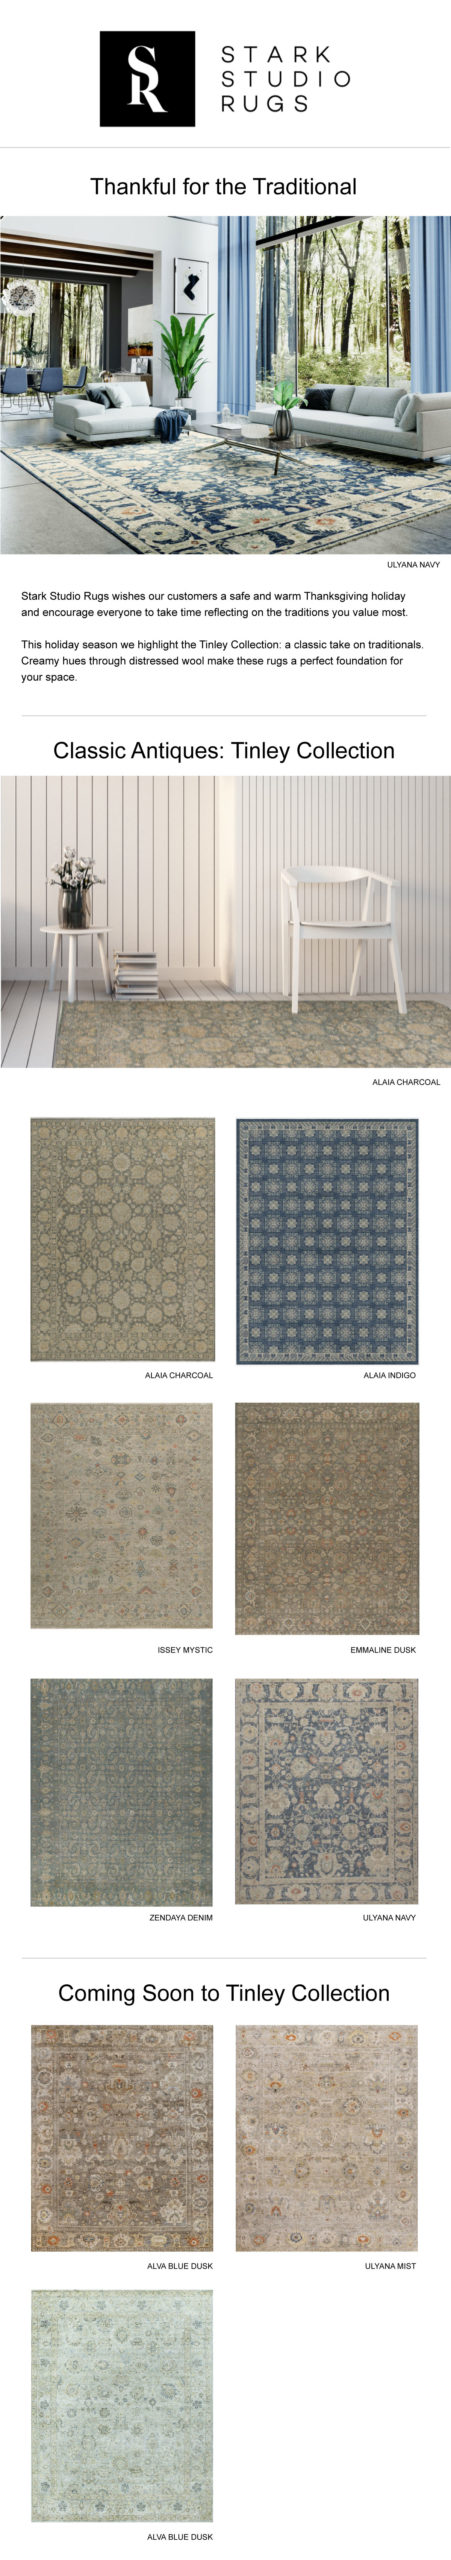 Images of stark studio rugs, Tinley collection